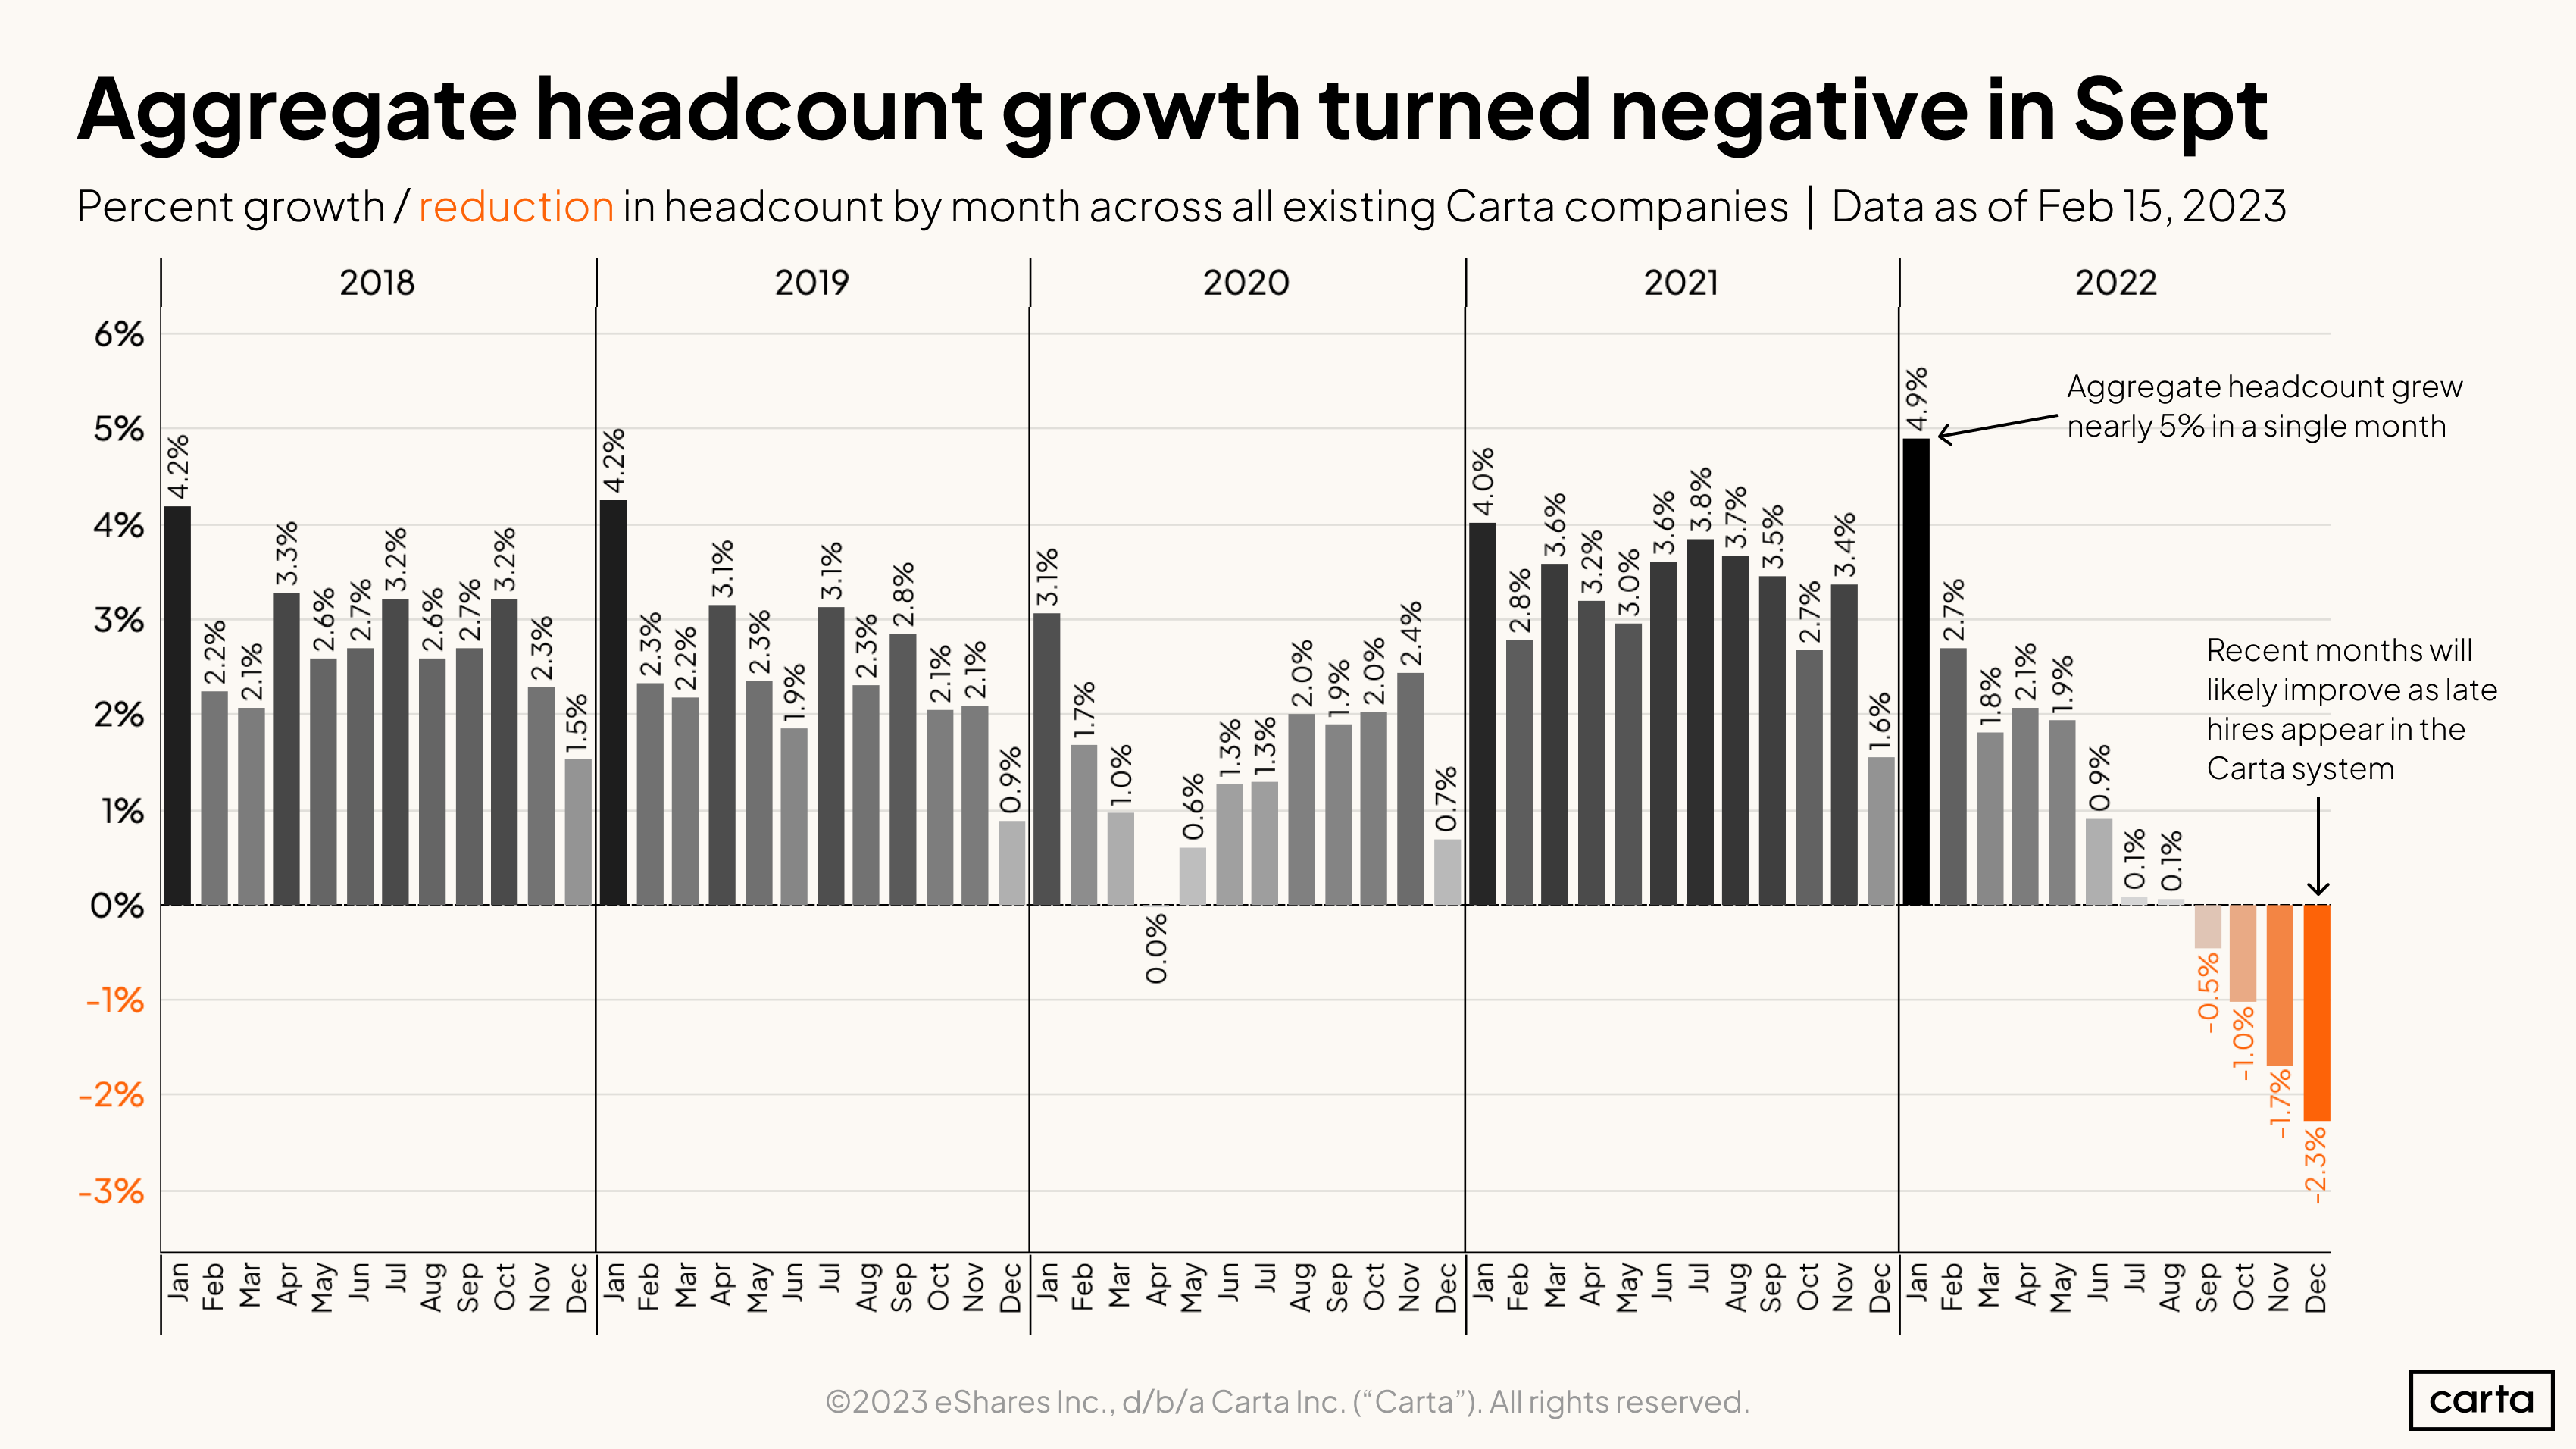 Percent growth / reduction in headcount by month across all existing Carta companies